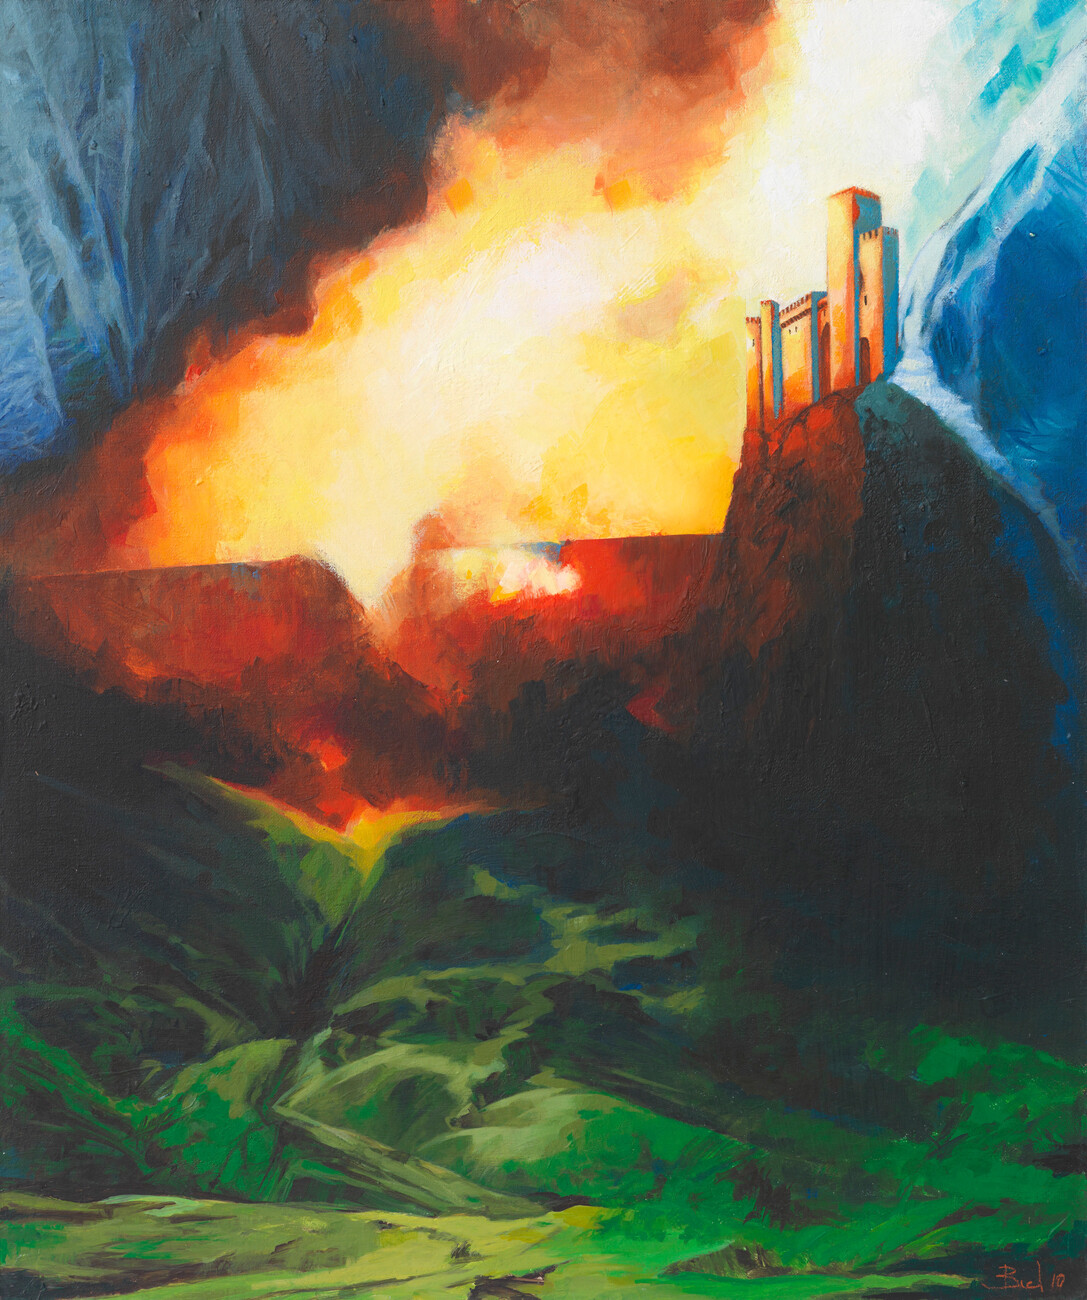 Fortress on fire - Acrylic on board.